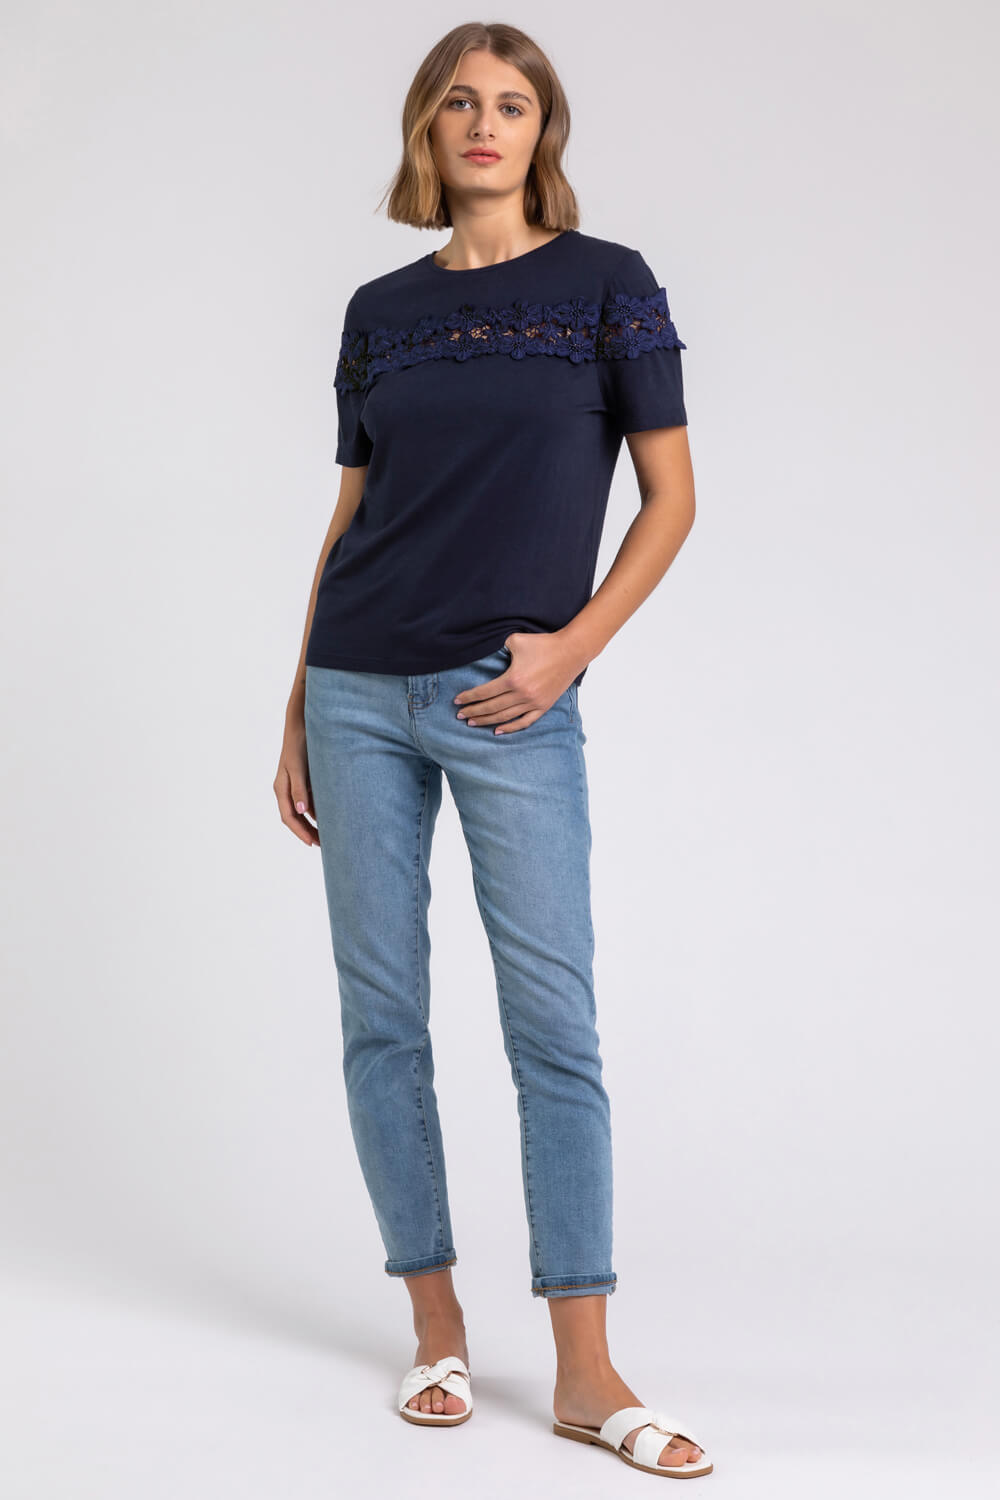 Navy  Lace Detail Jersey T-Shirt, Image 3 of 5